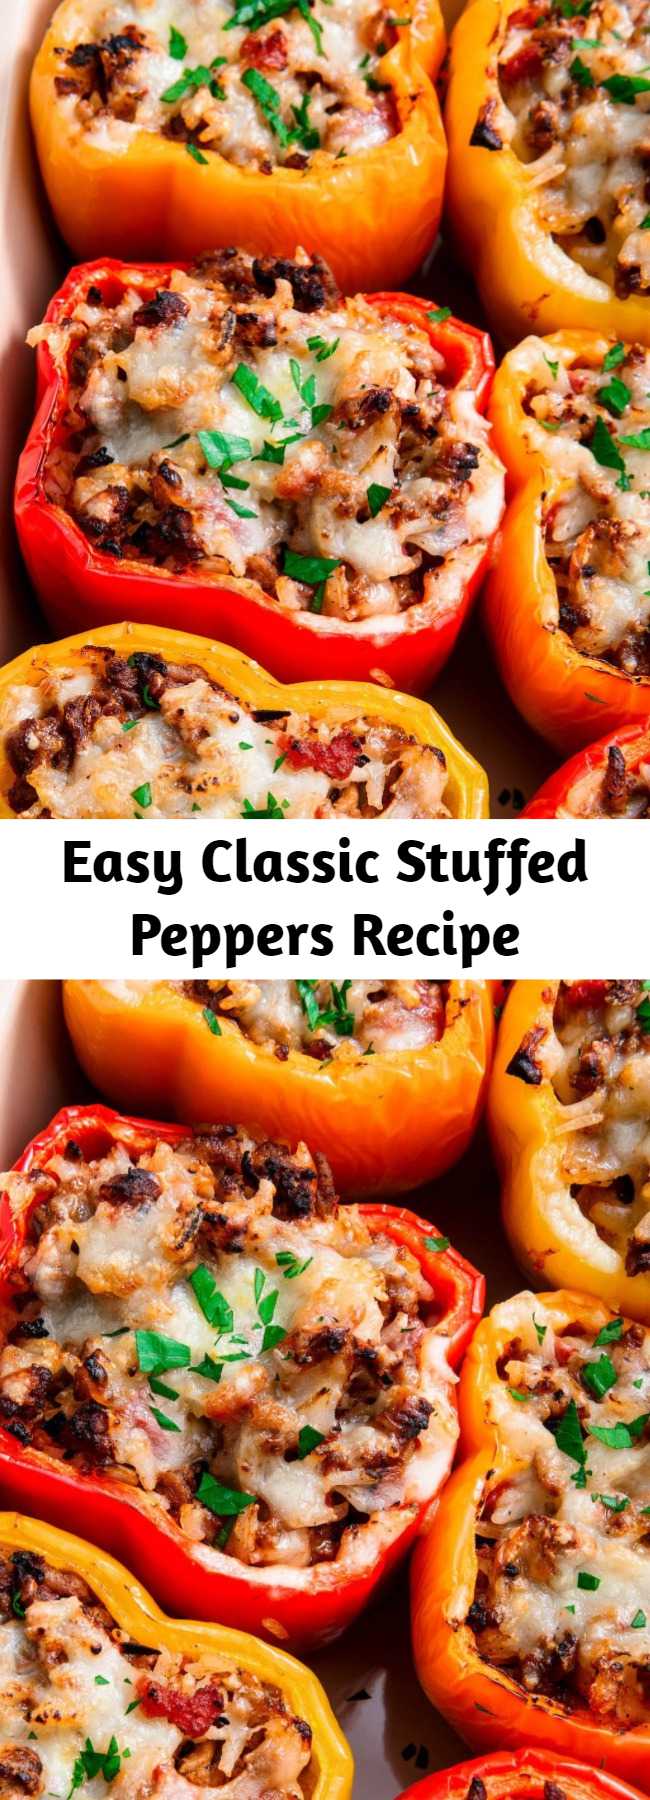 Easy Classic Stuffed Peppers Recipe - Classic Stuffed Peppers are the fast family dinner you need. #recipe #easy #easyrecipes #stuffedpeppers #peppers #dinner #dinnerrecipes #groundbeef #cheese #healthy #lowcarb #lowcarbrecipes #family